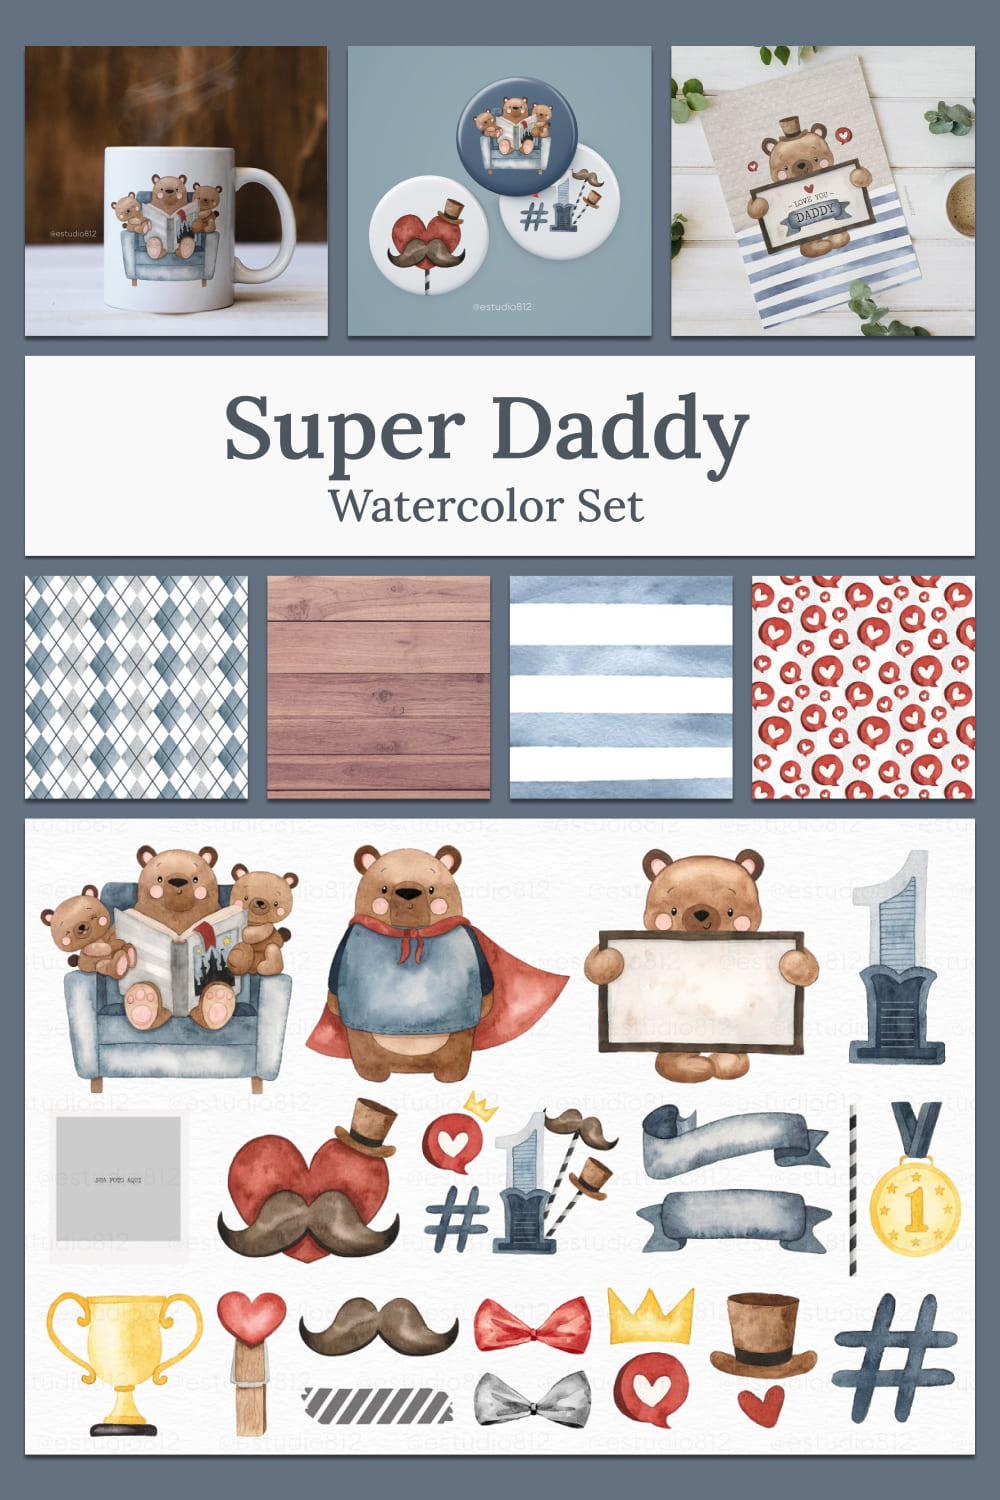 Super daddy watercolor set - pinterest image preview.